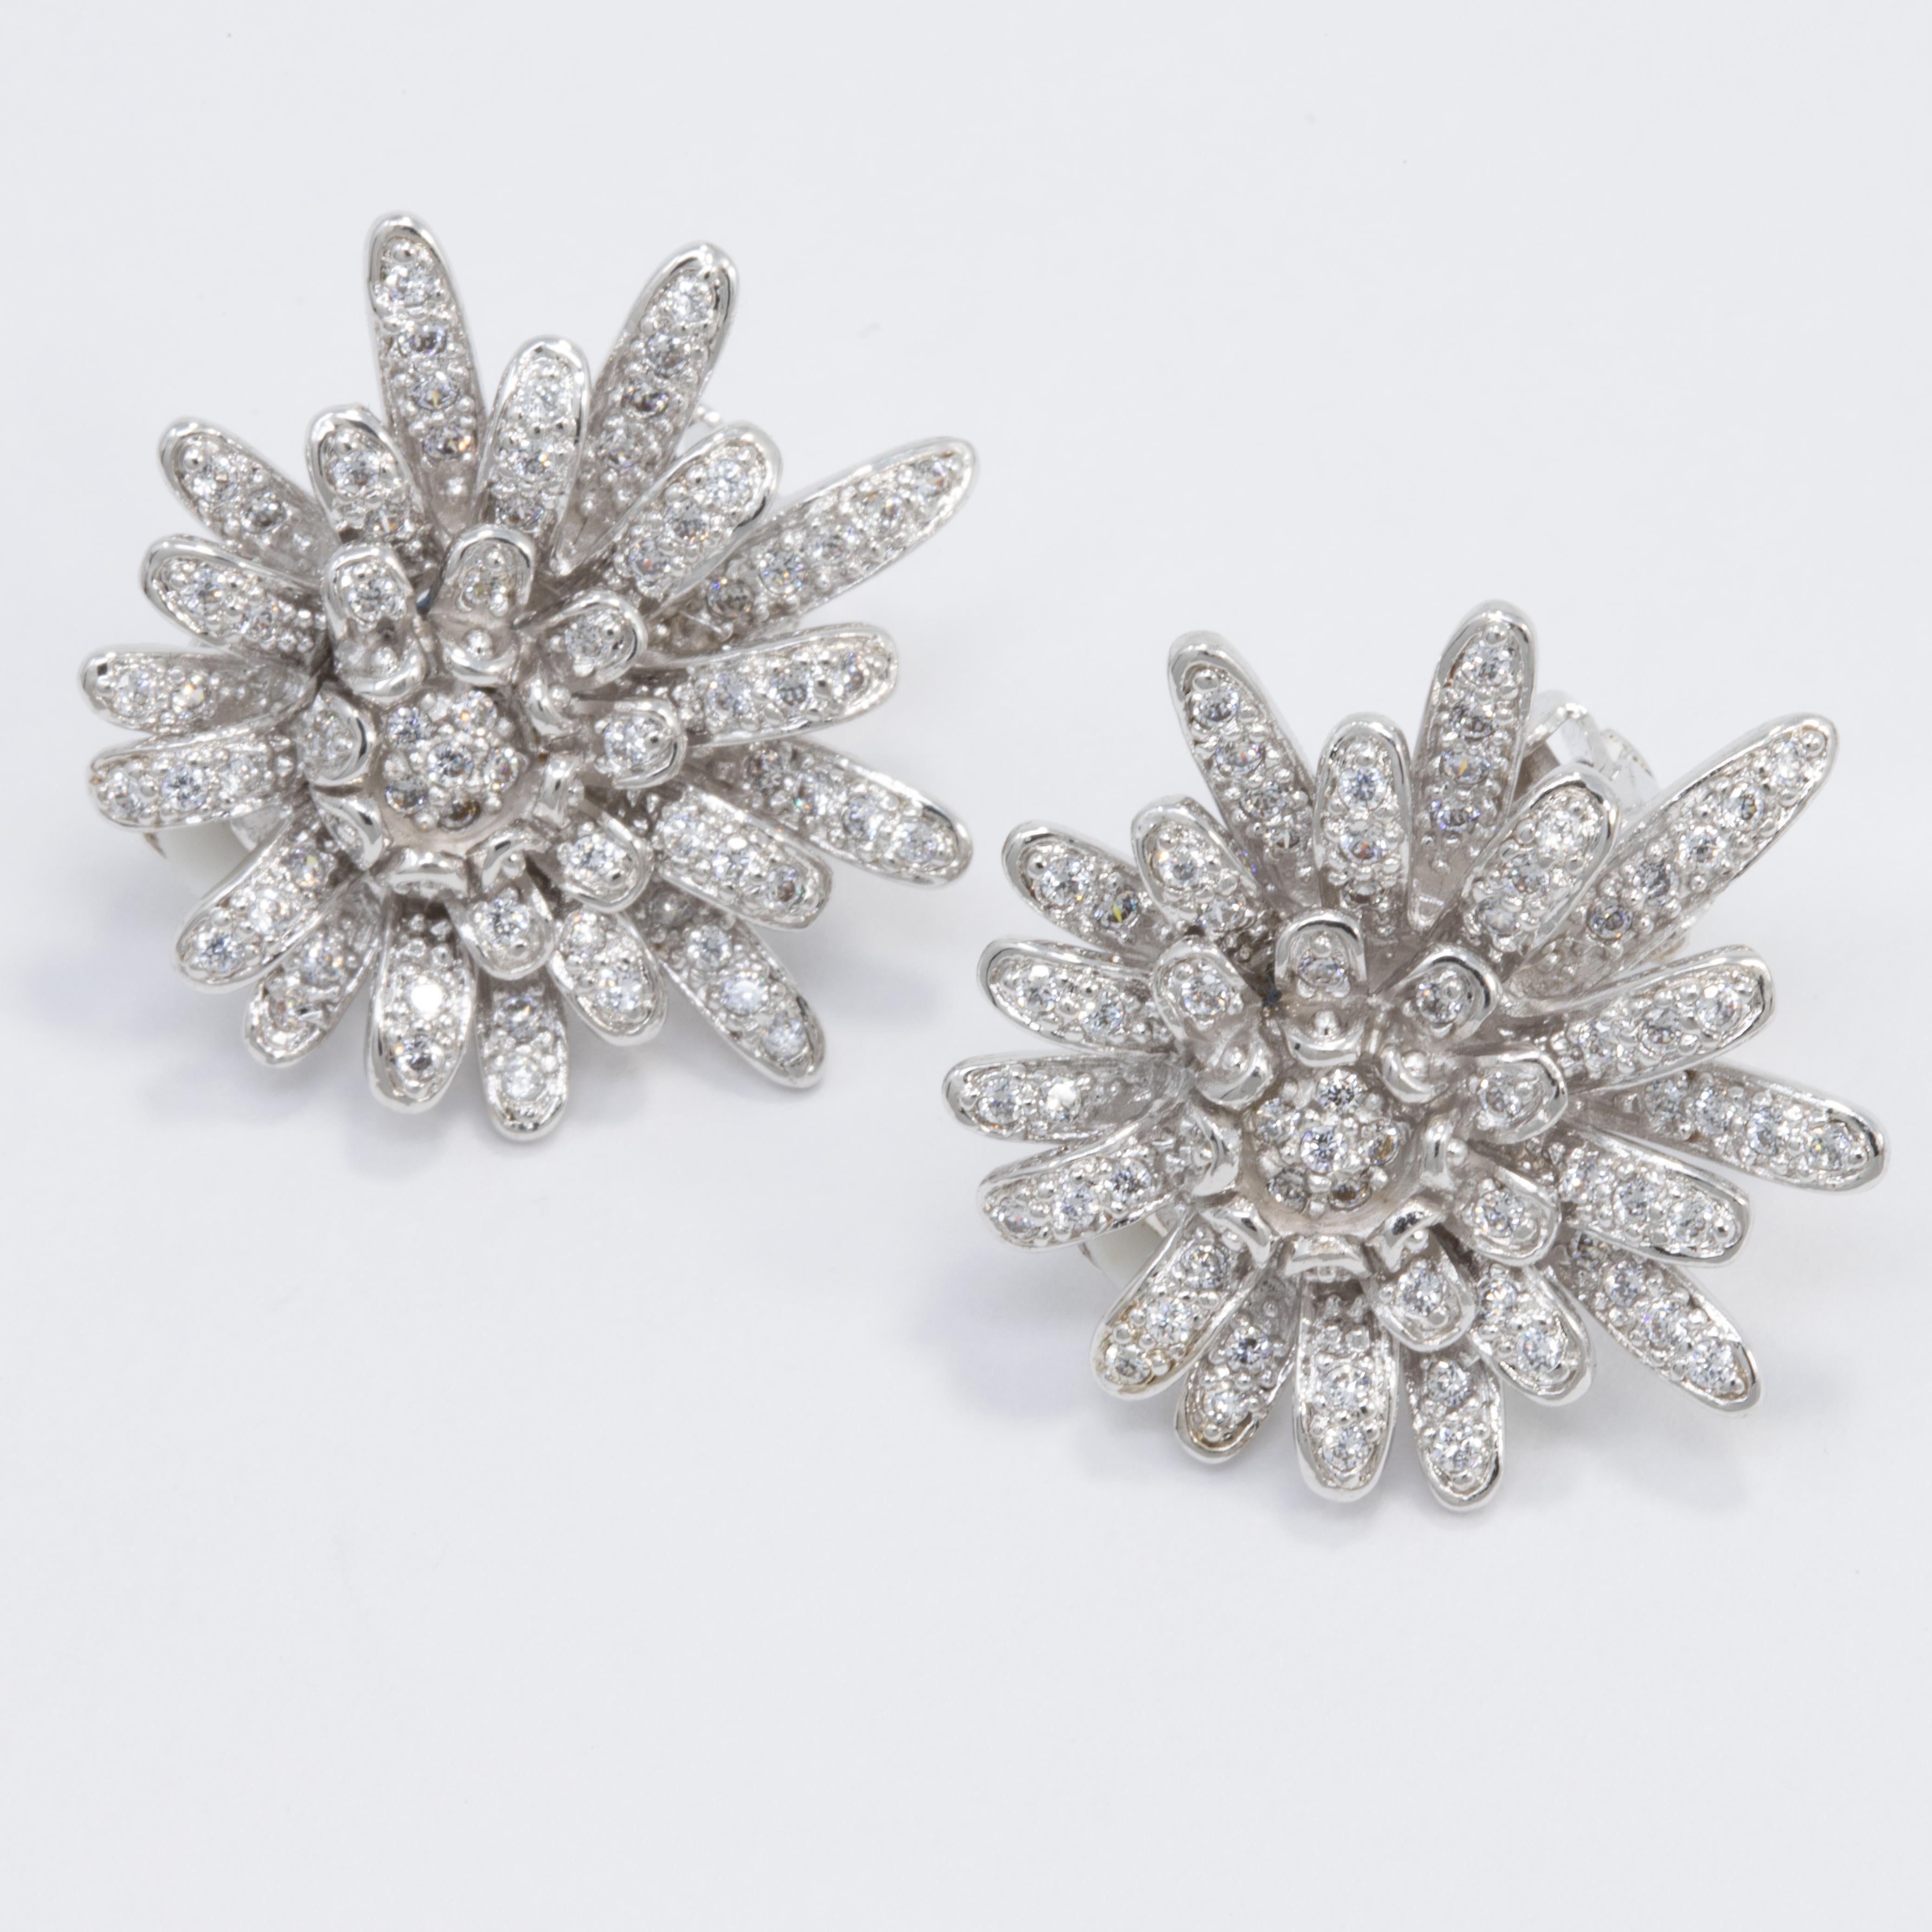 Add some sparkle to your outfit with these flower button clip on earrings by Kenneth Jay Lane!

Clear cubic zirconia crystals. Silver tone.

Marks/Hallmarks: KJLane

CZ by Kenneth Jay Lane line. Designed in New York. Made in China.